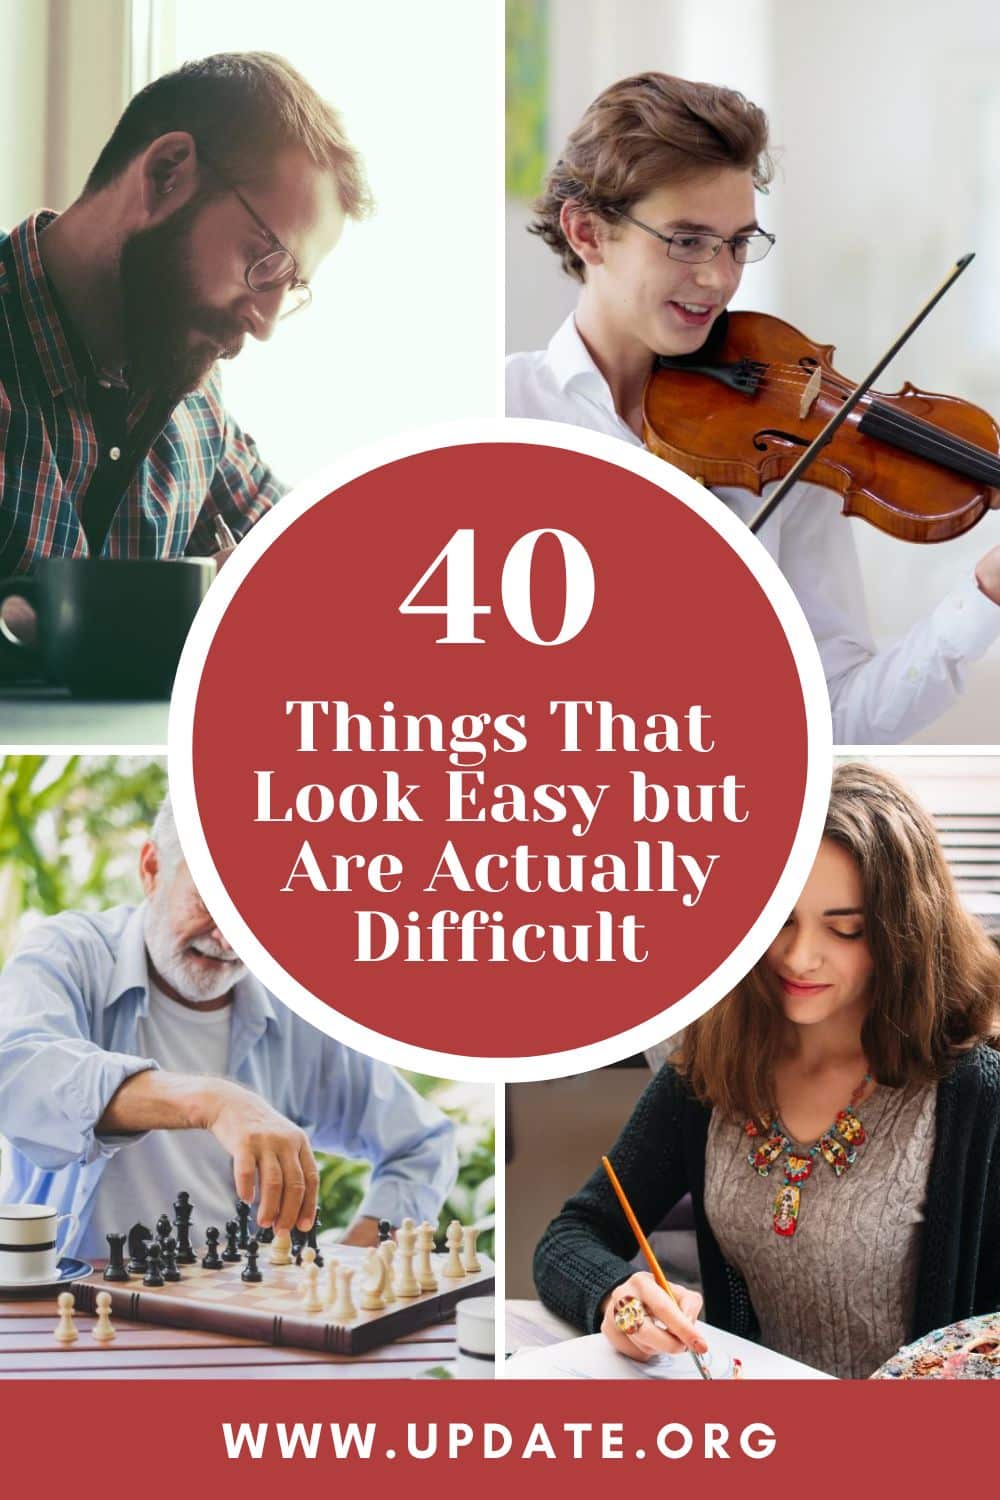 40 Things That Look Easy but Are Actually Difficult pinterest image.